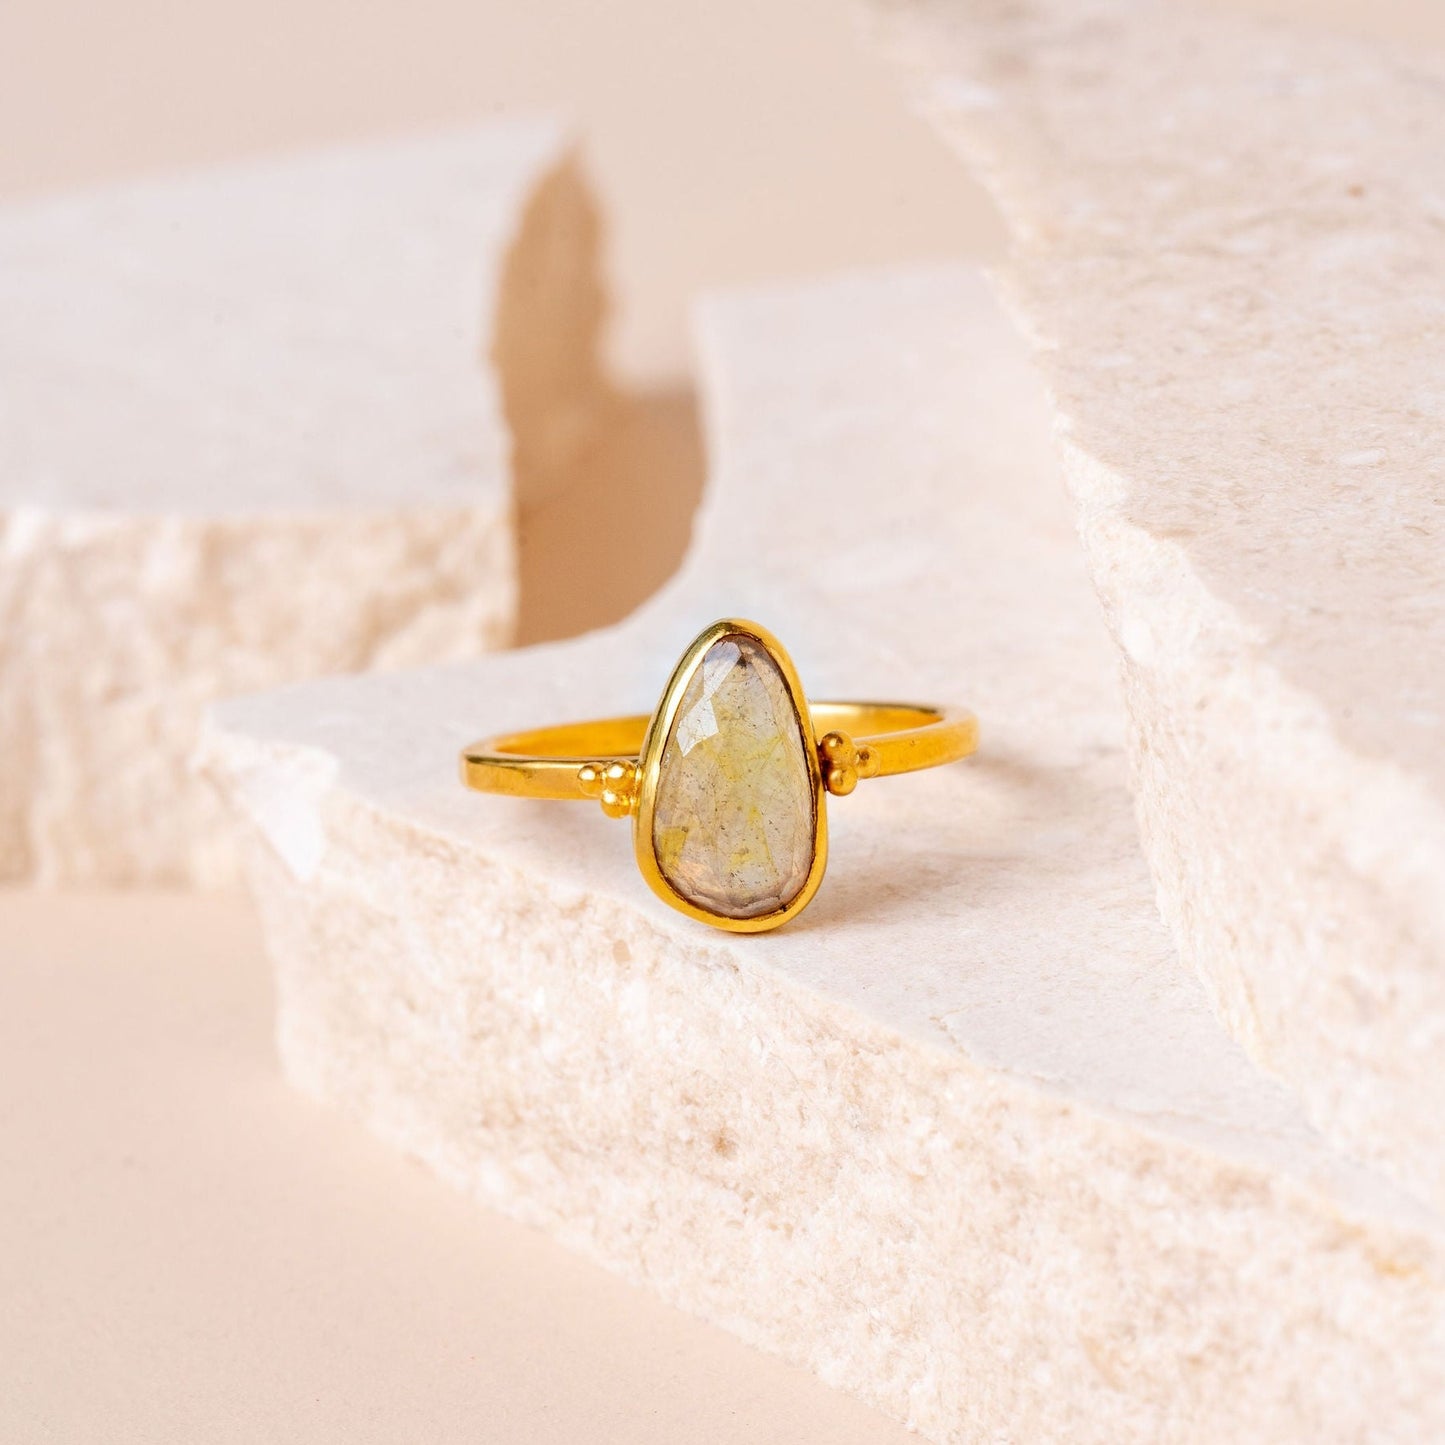 Handmade gold ring adorned with a graceful teardrop-shaped yellow sapphire and granulation accents.